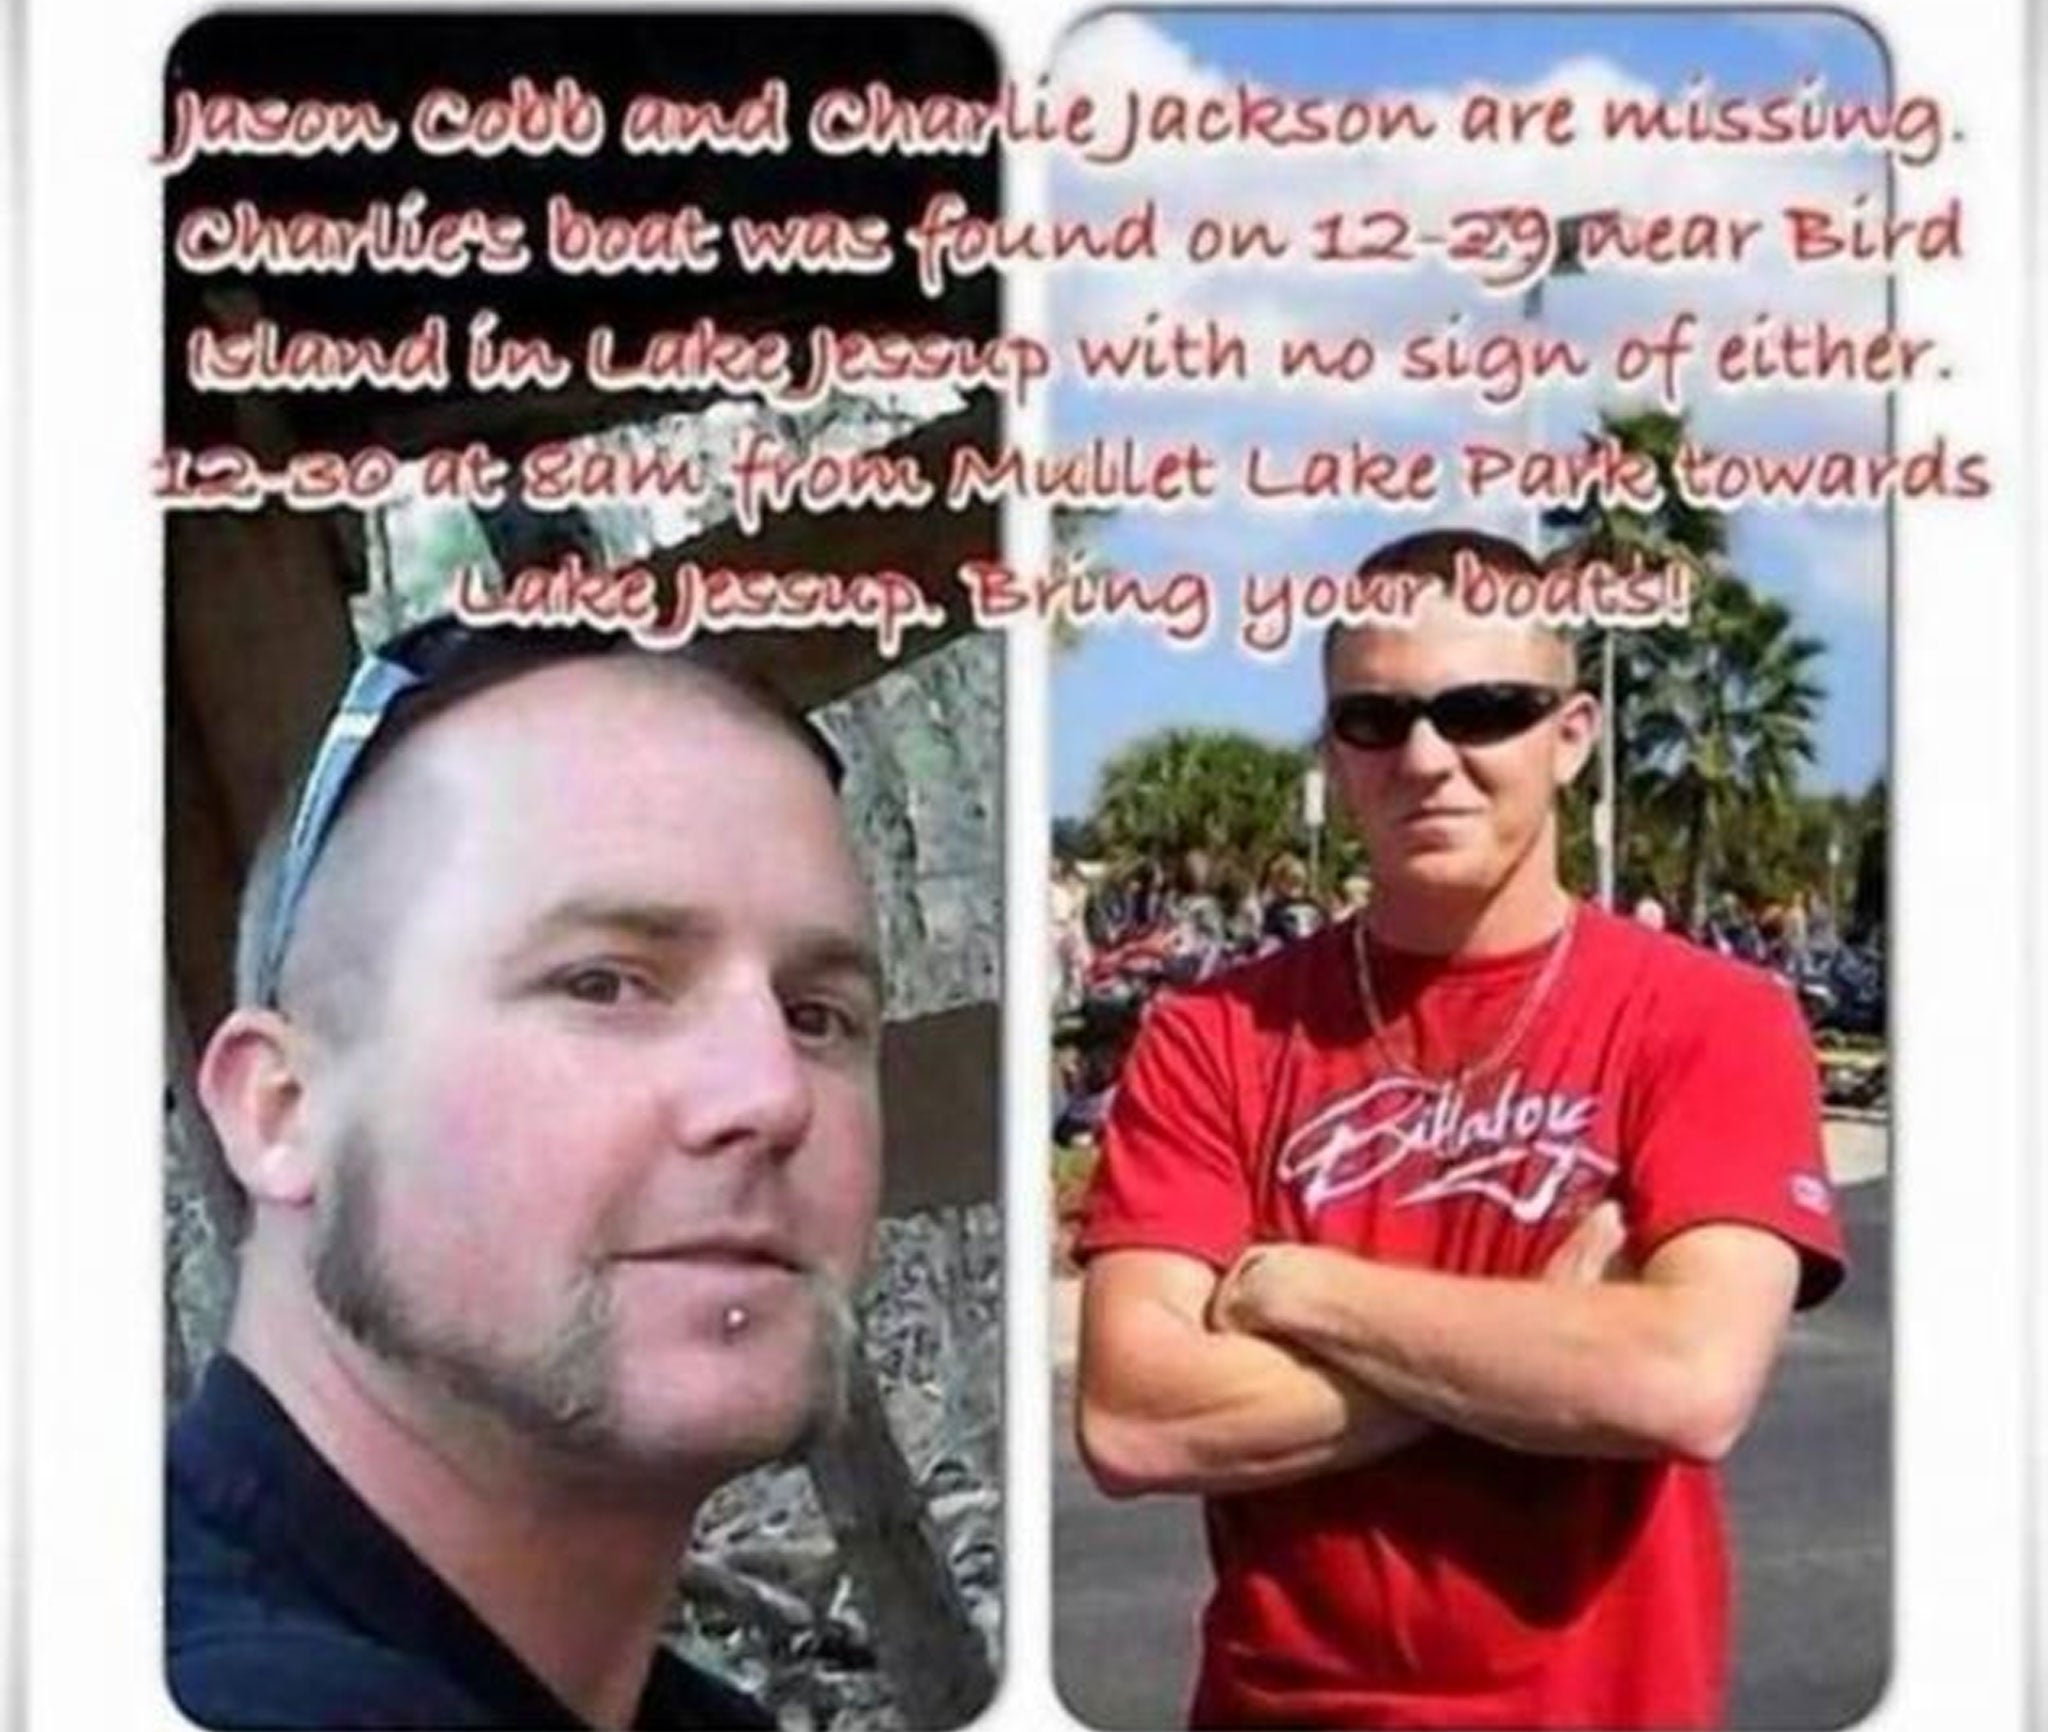 Friends and family of Jason Cobb (left) and Charlie Jackson (right) have appealed for help to find them on Facebook